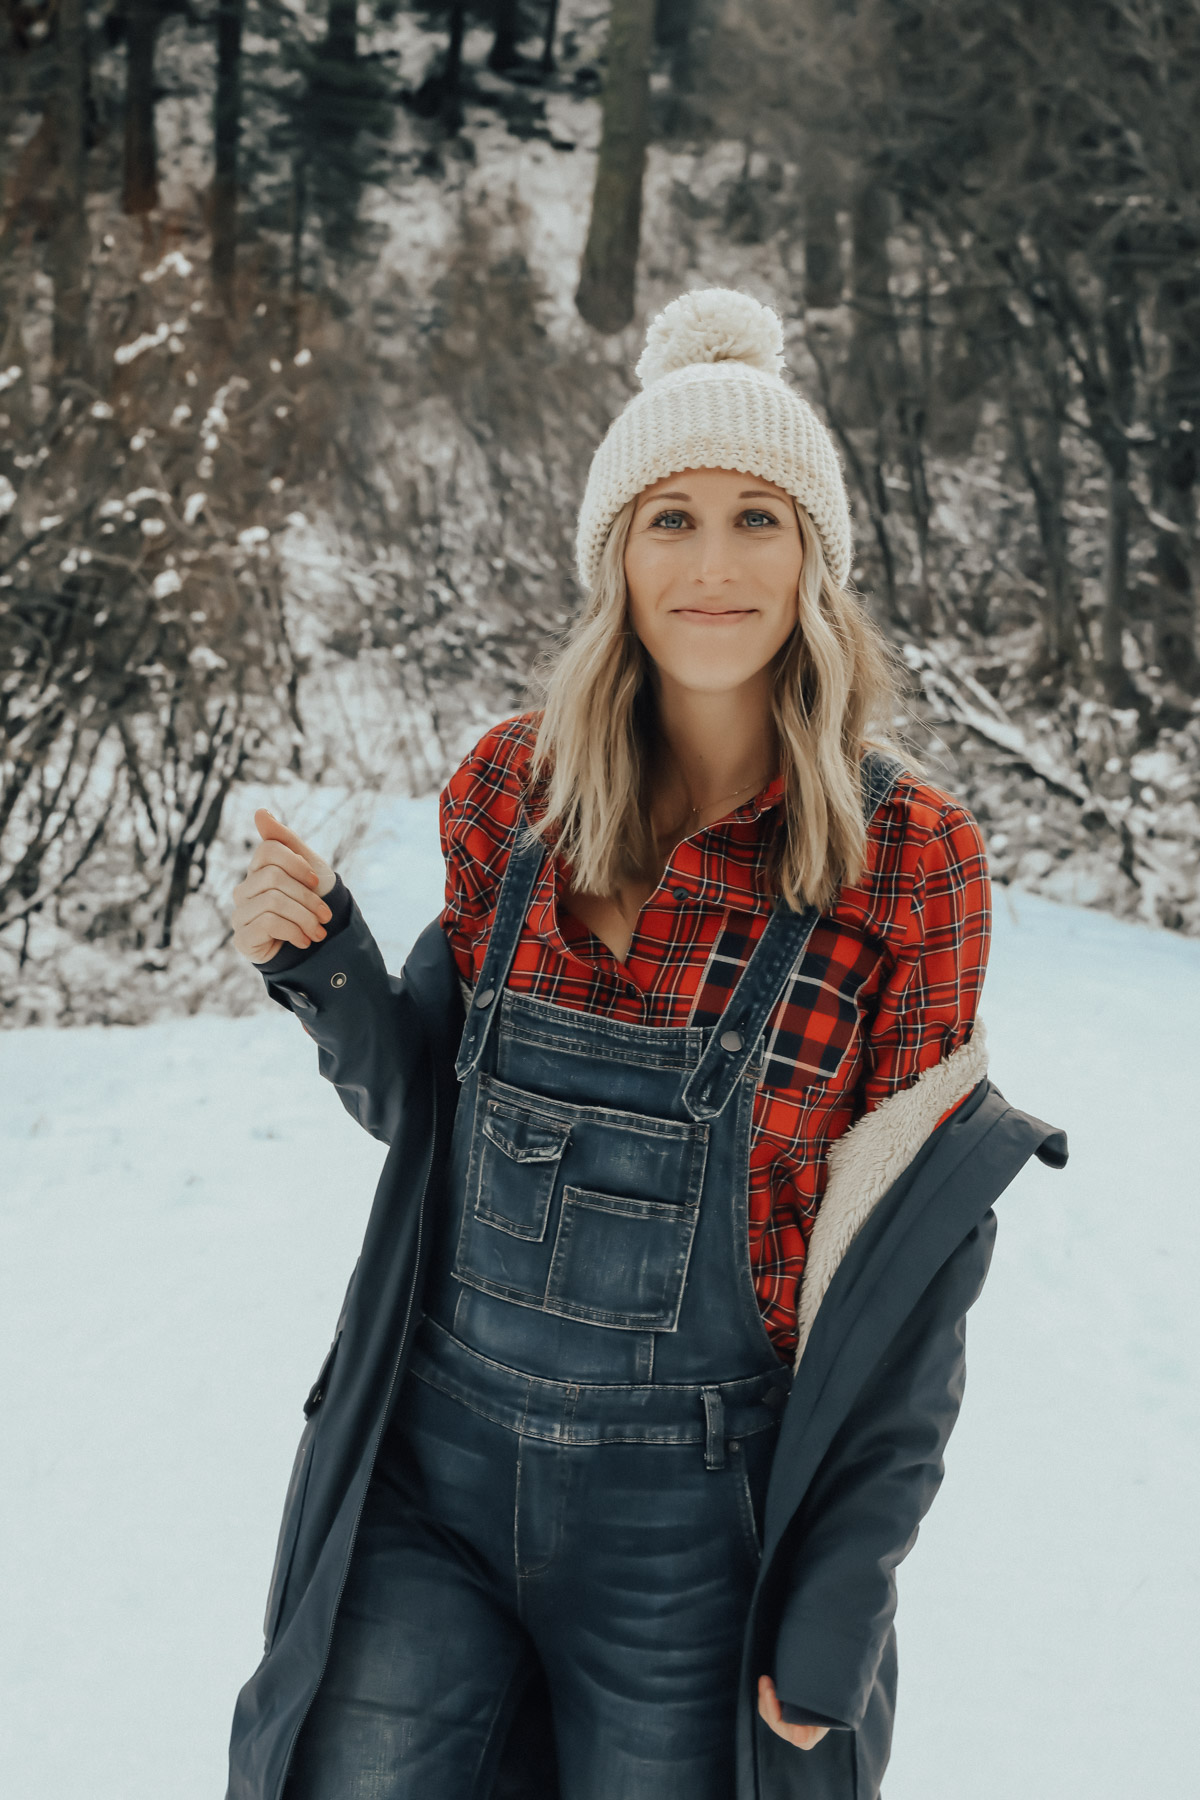 snow outfit with plaid shirt, overalls, and sorell boots